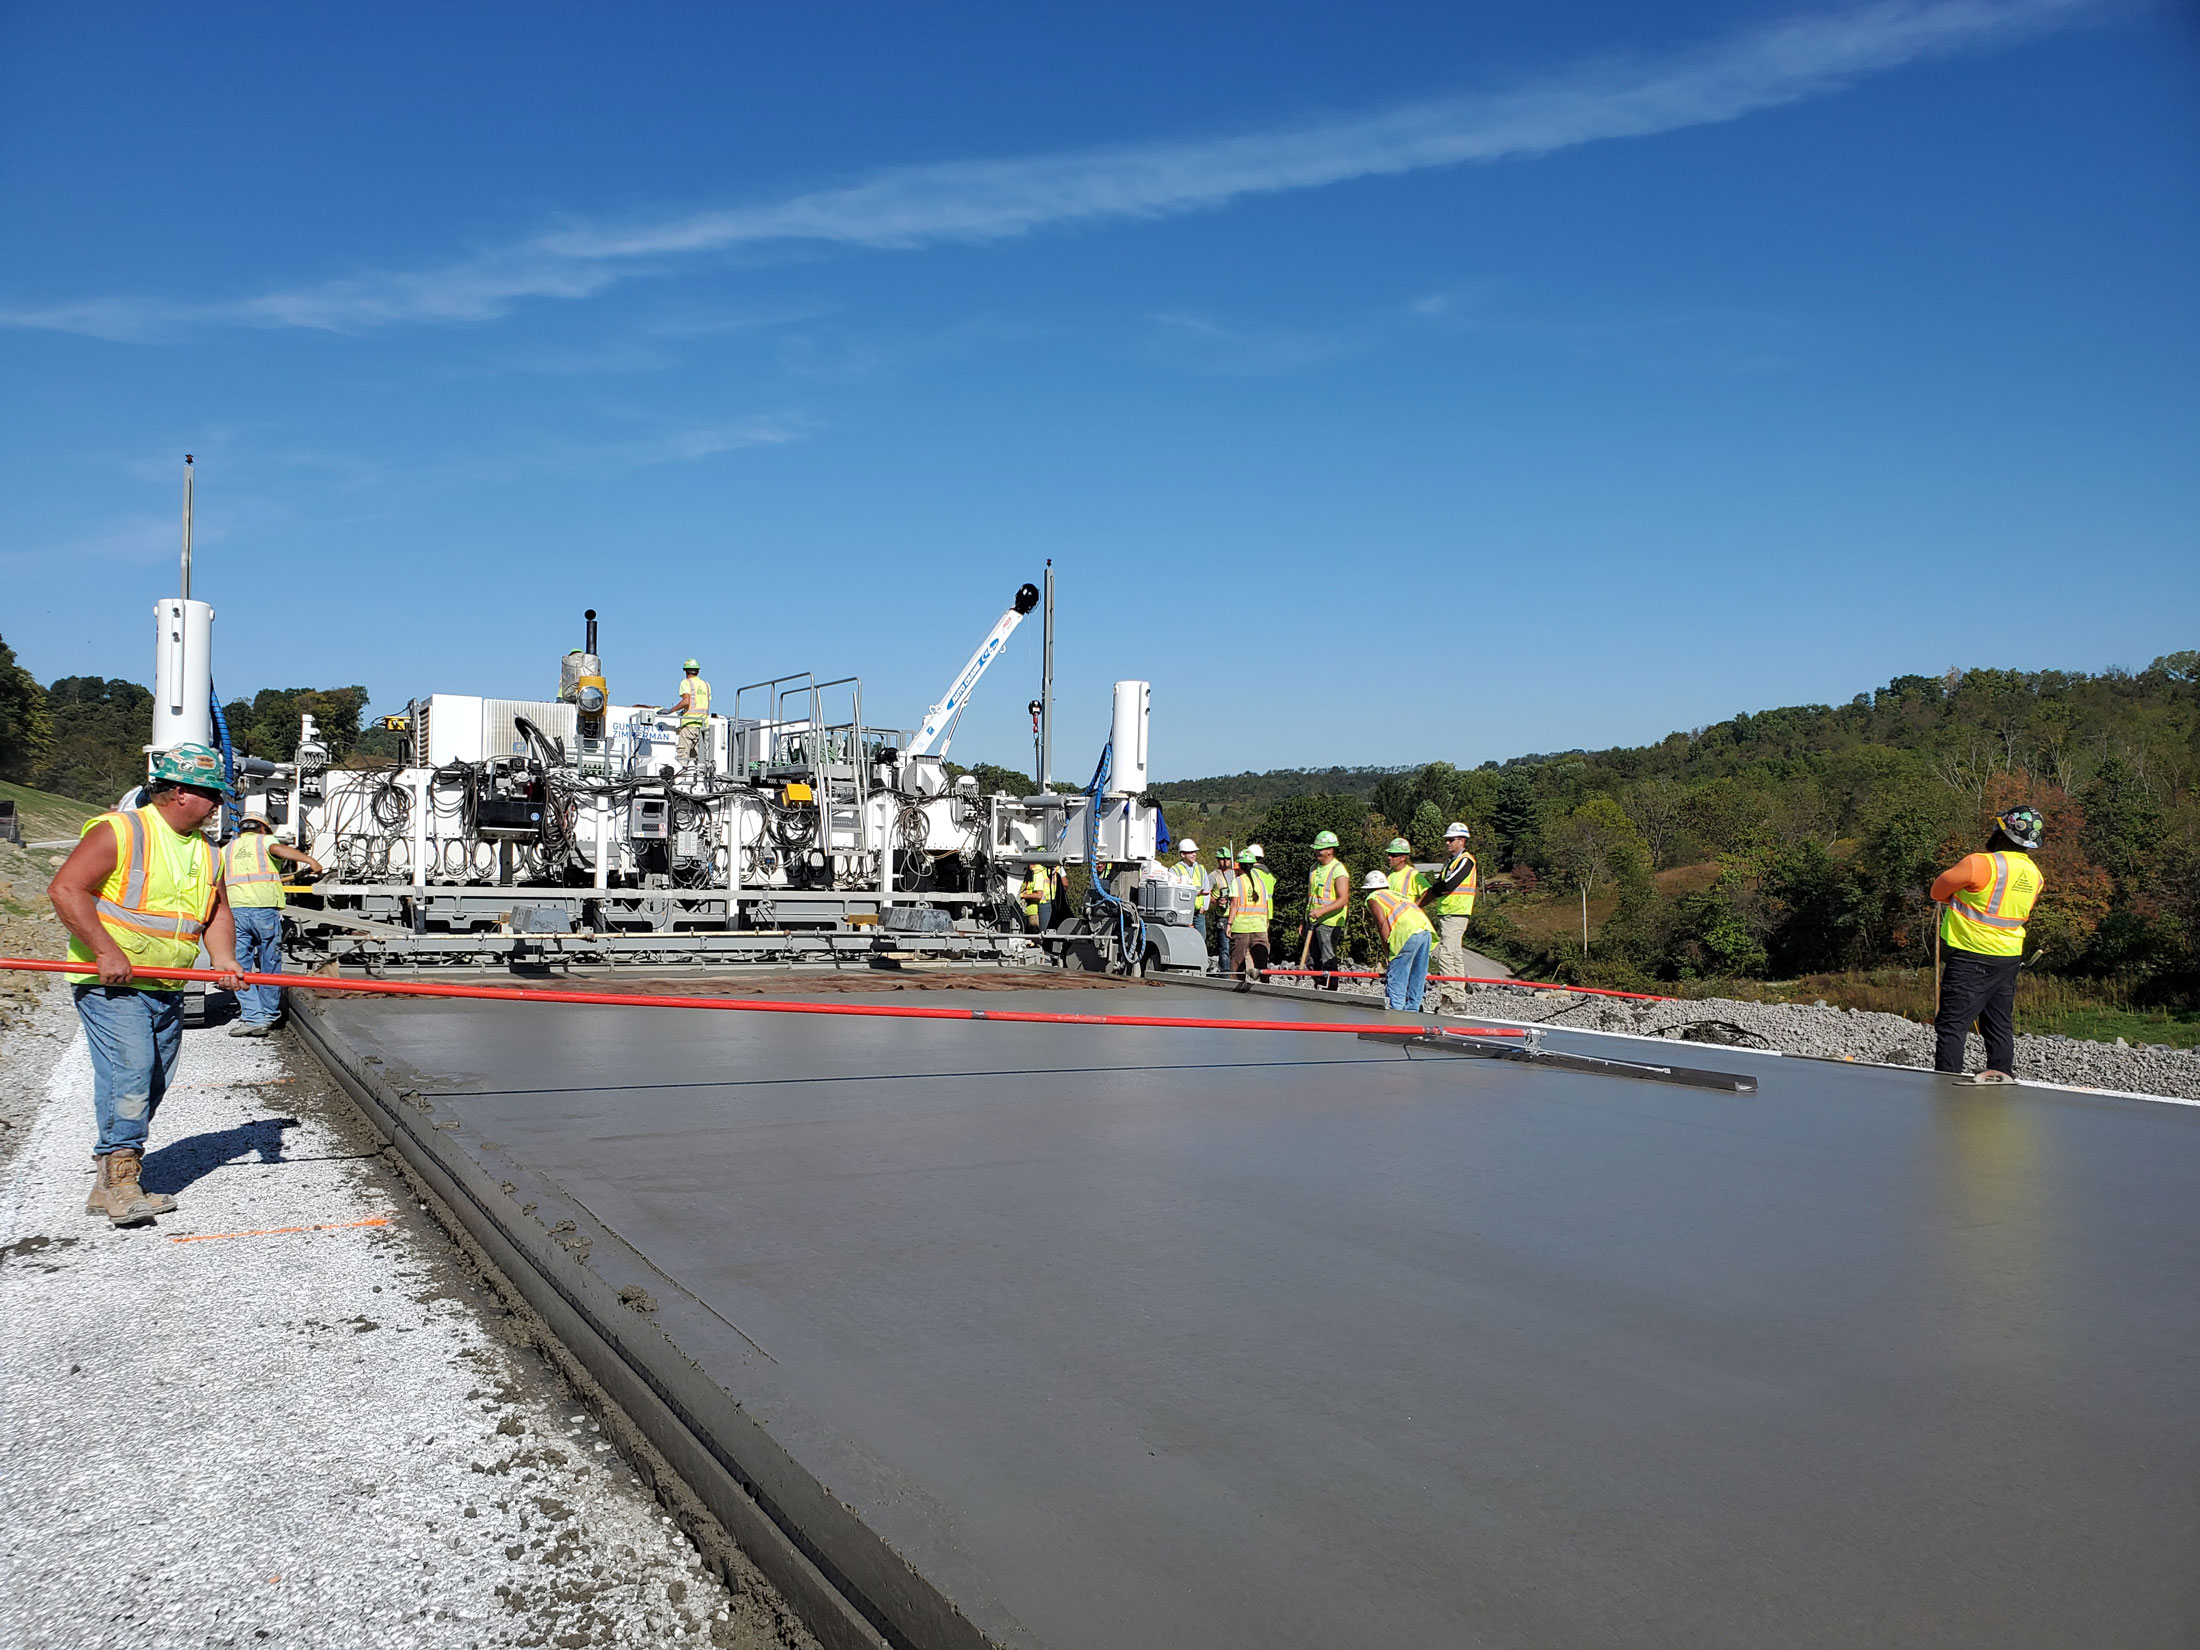 September 27 2019: Southern Beltway Plant and Paving Tour